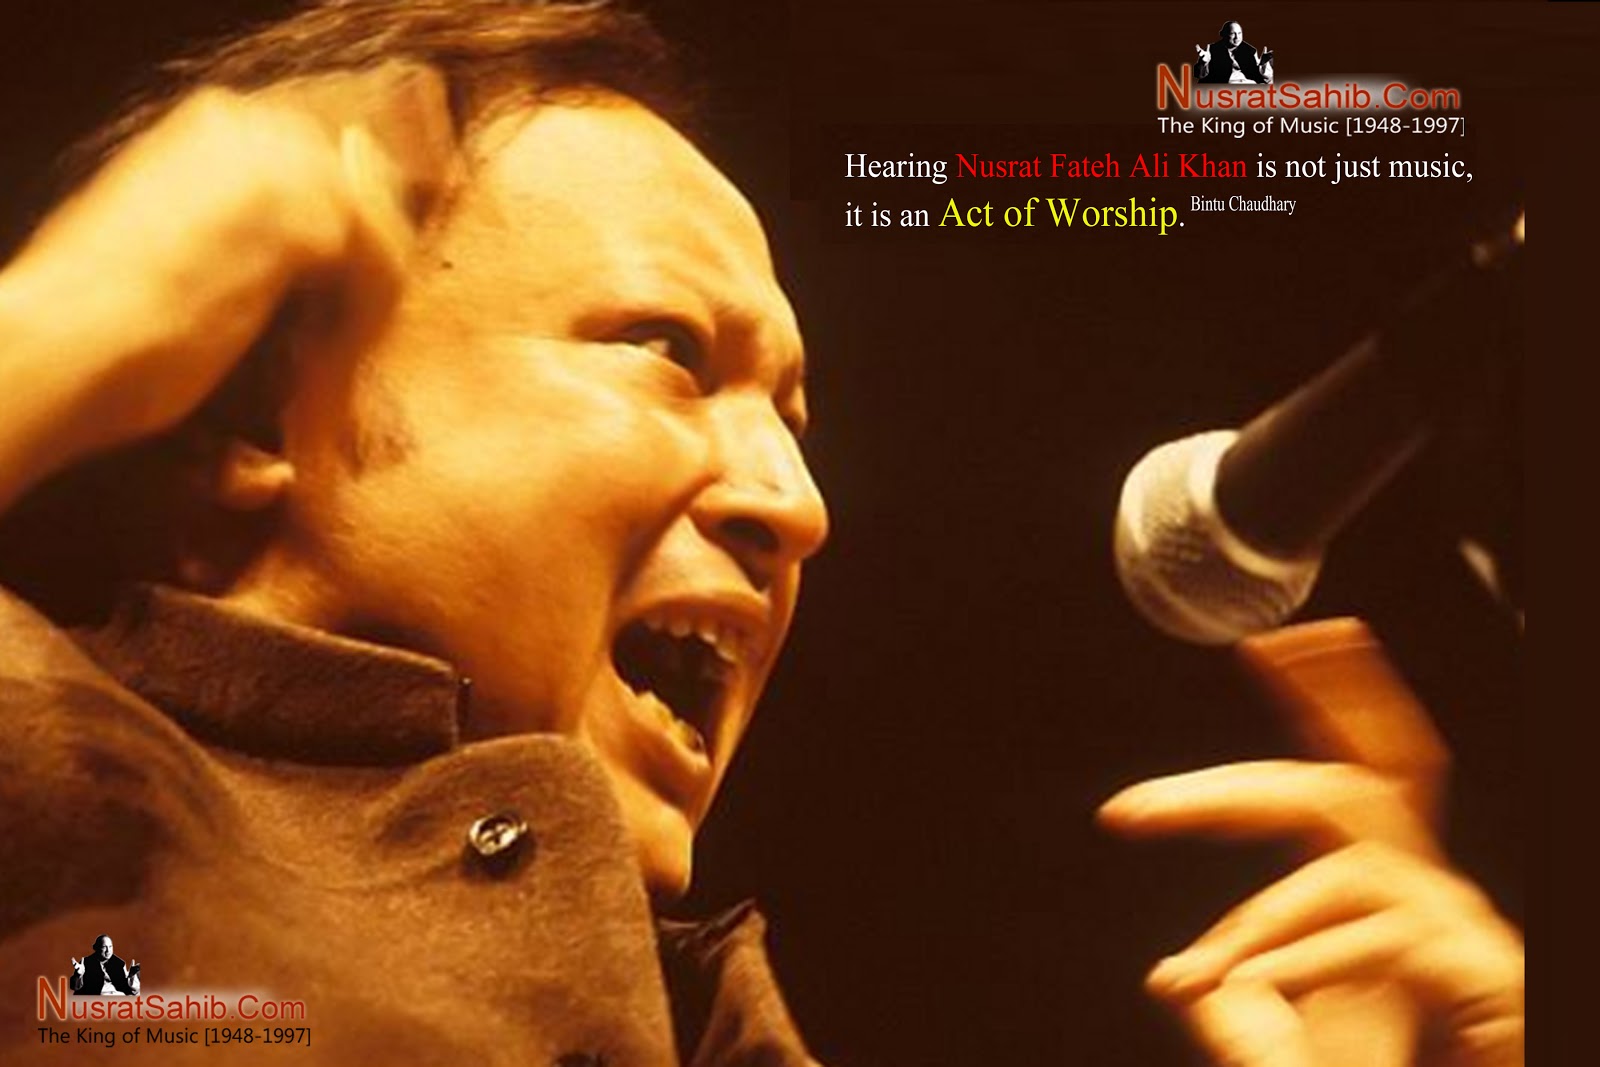 Hearing Nusrat Fateh Ali Khan is not just music, it is an Act of Worship